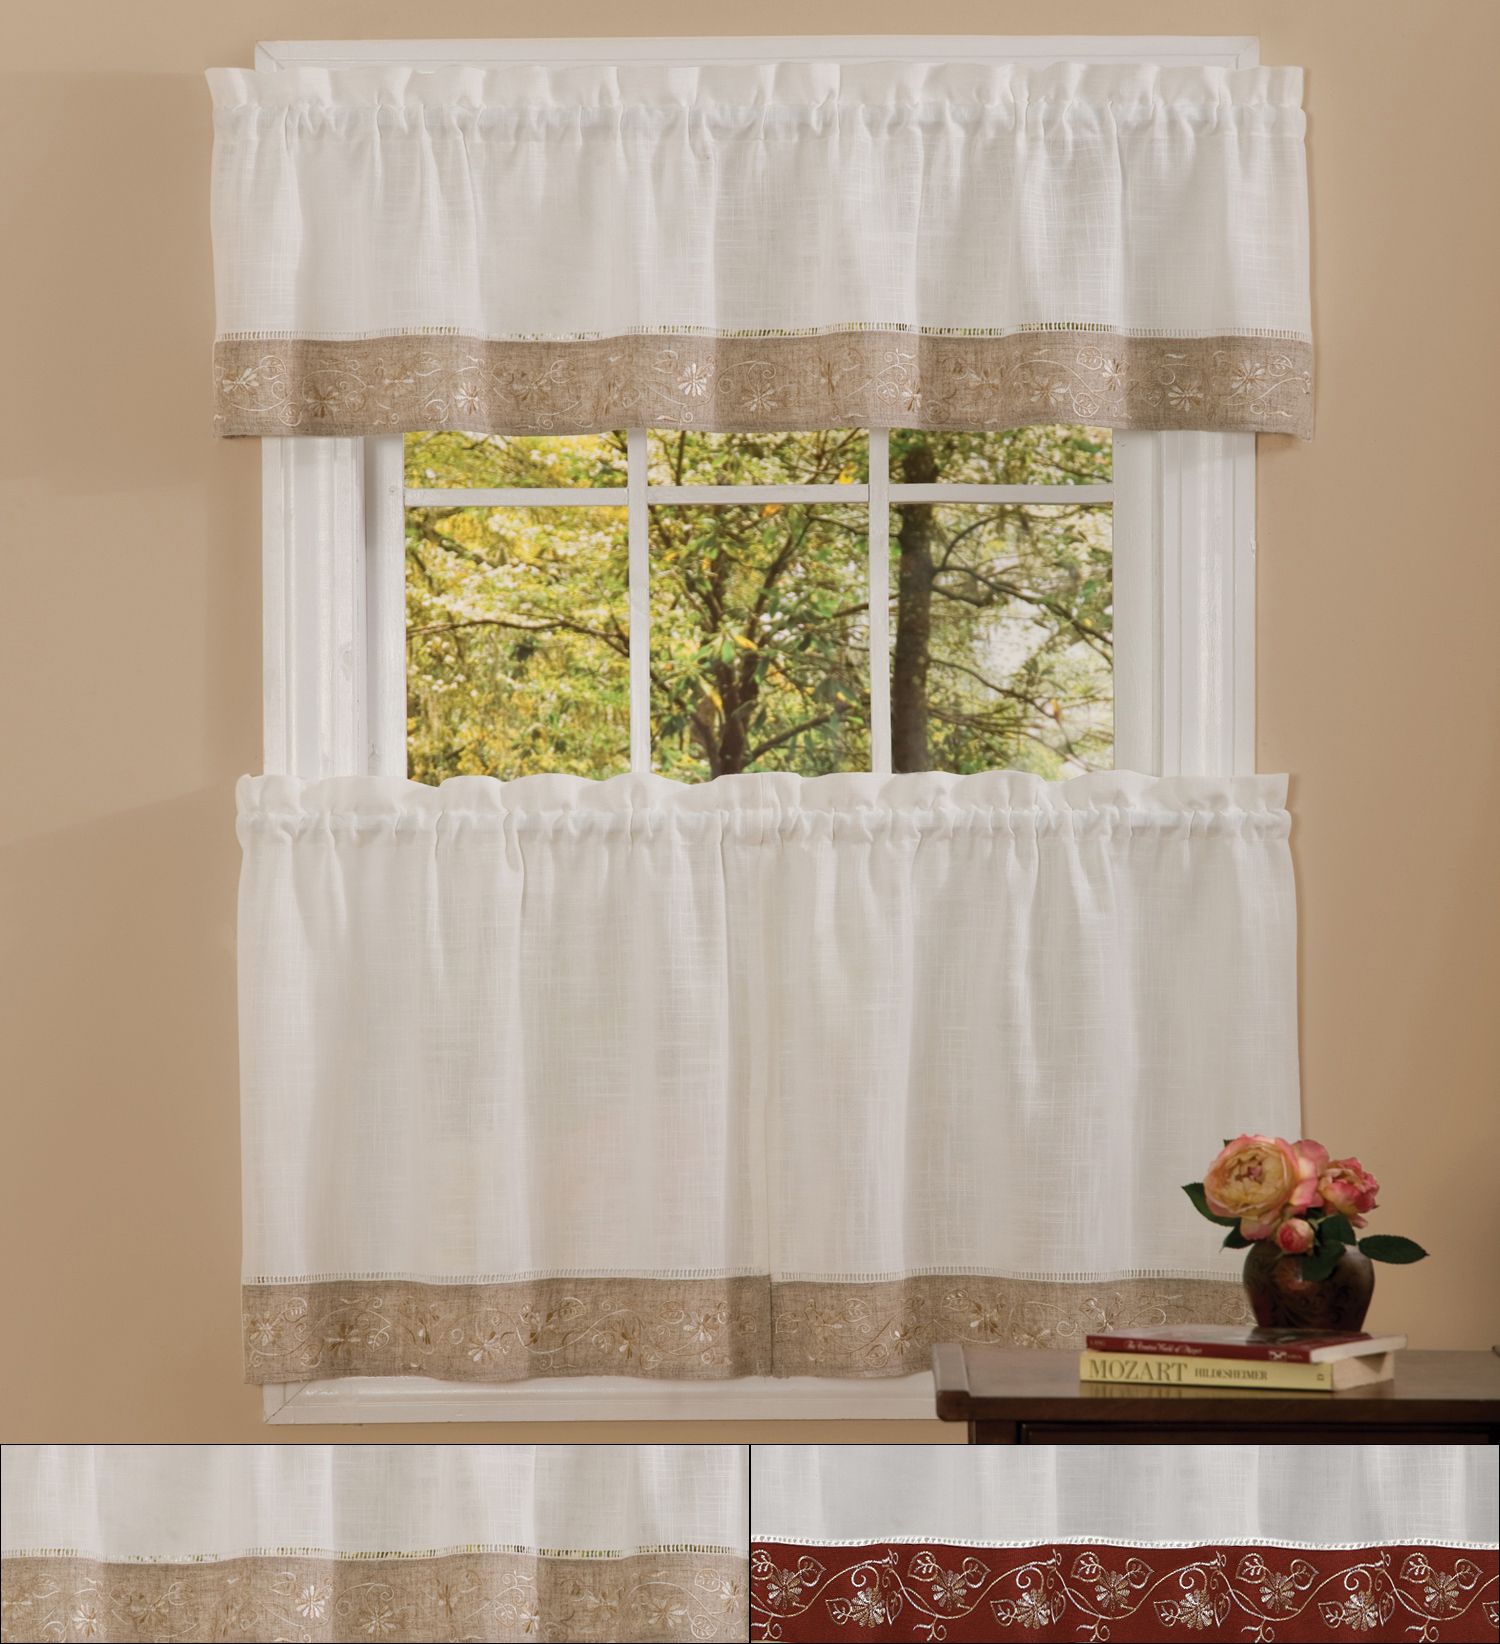 Details About Oakwood Linen Style Kitchen Window Curtain 24" Tiers &  Valance Set Regarding Floral Lace Rod Pocket Kitchen Curtain Valance And Tiers Sets (View 8 of 20)